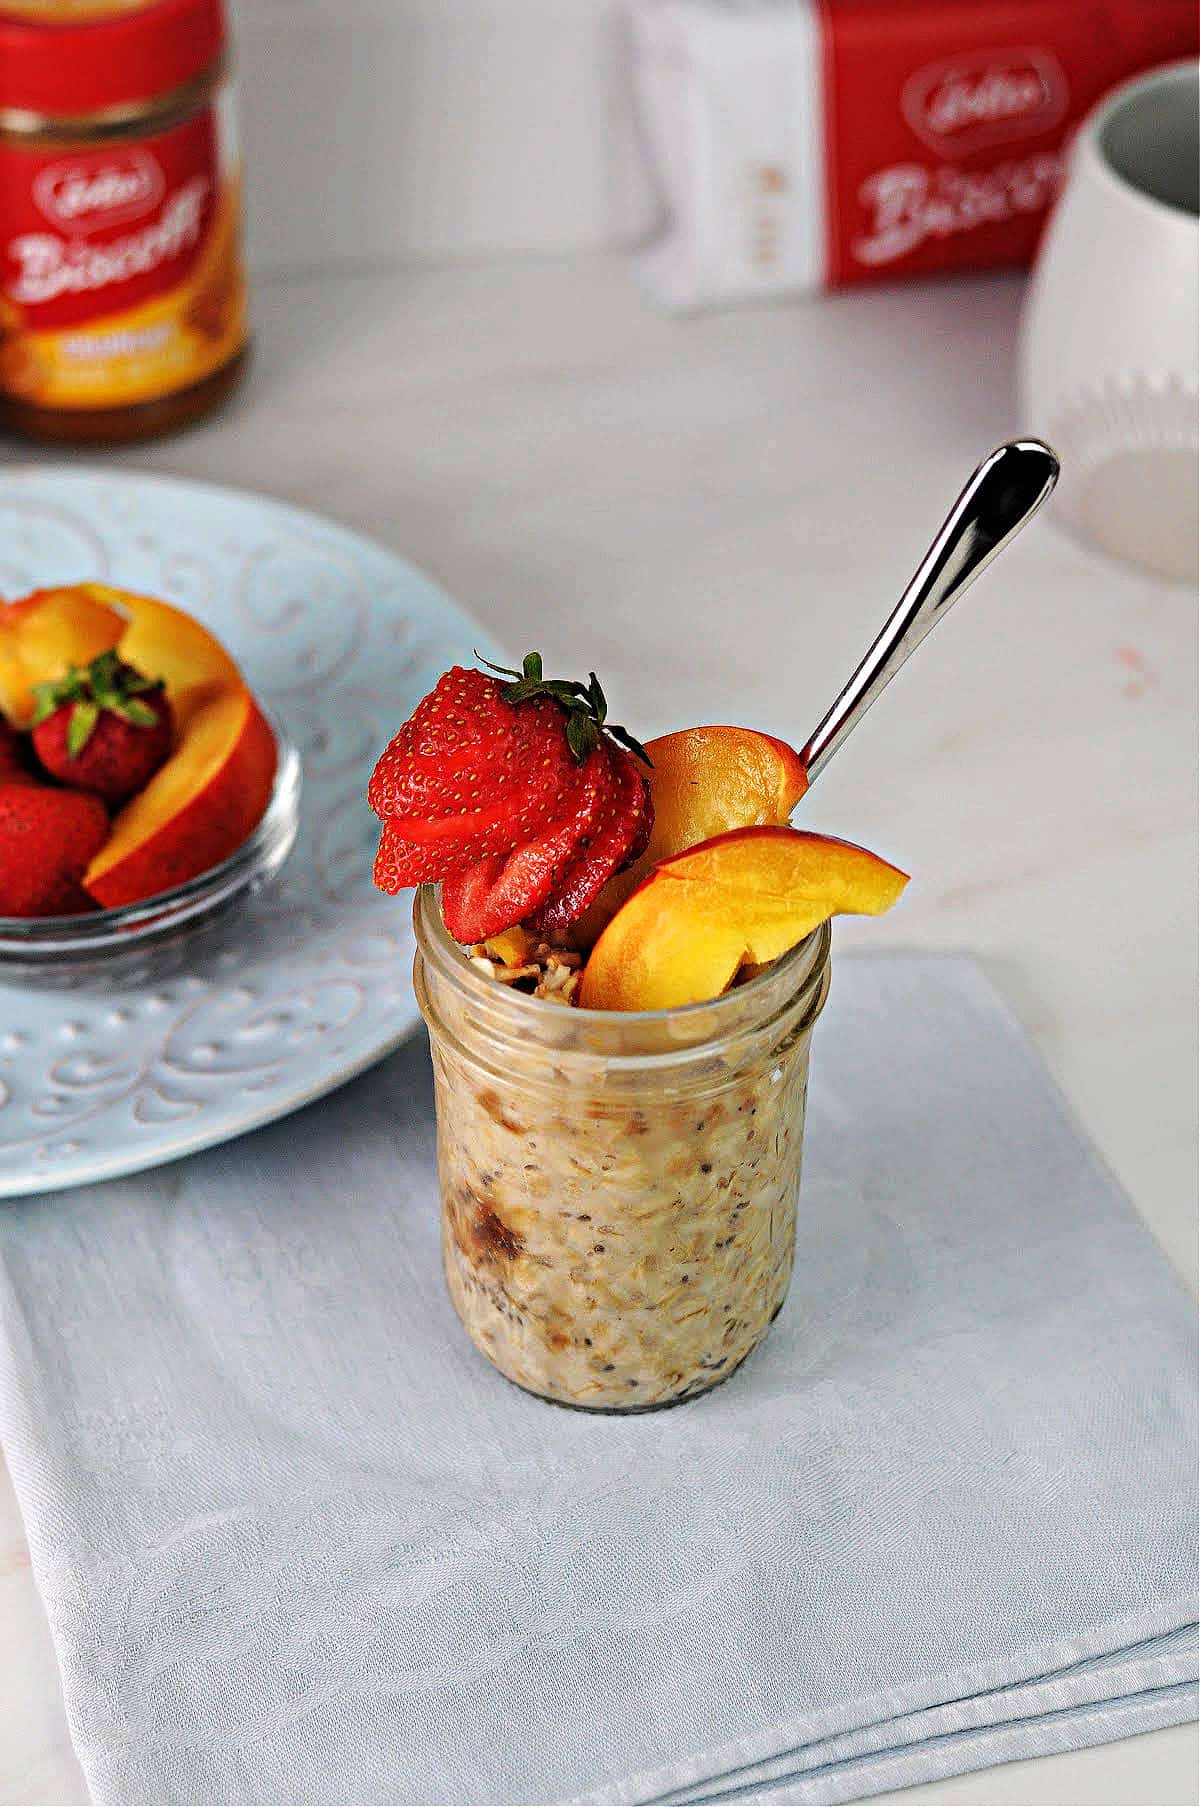 Biscoff overnight oats in a small jar garnished with fruit.